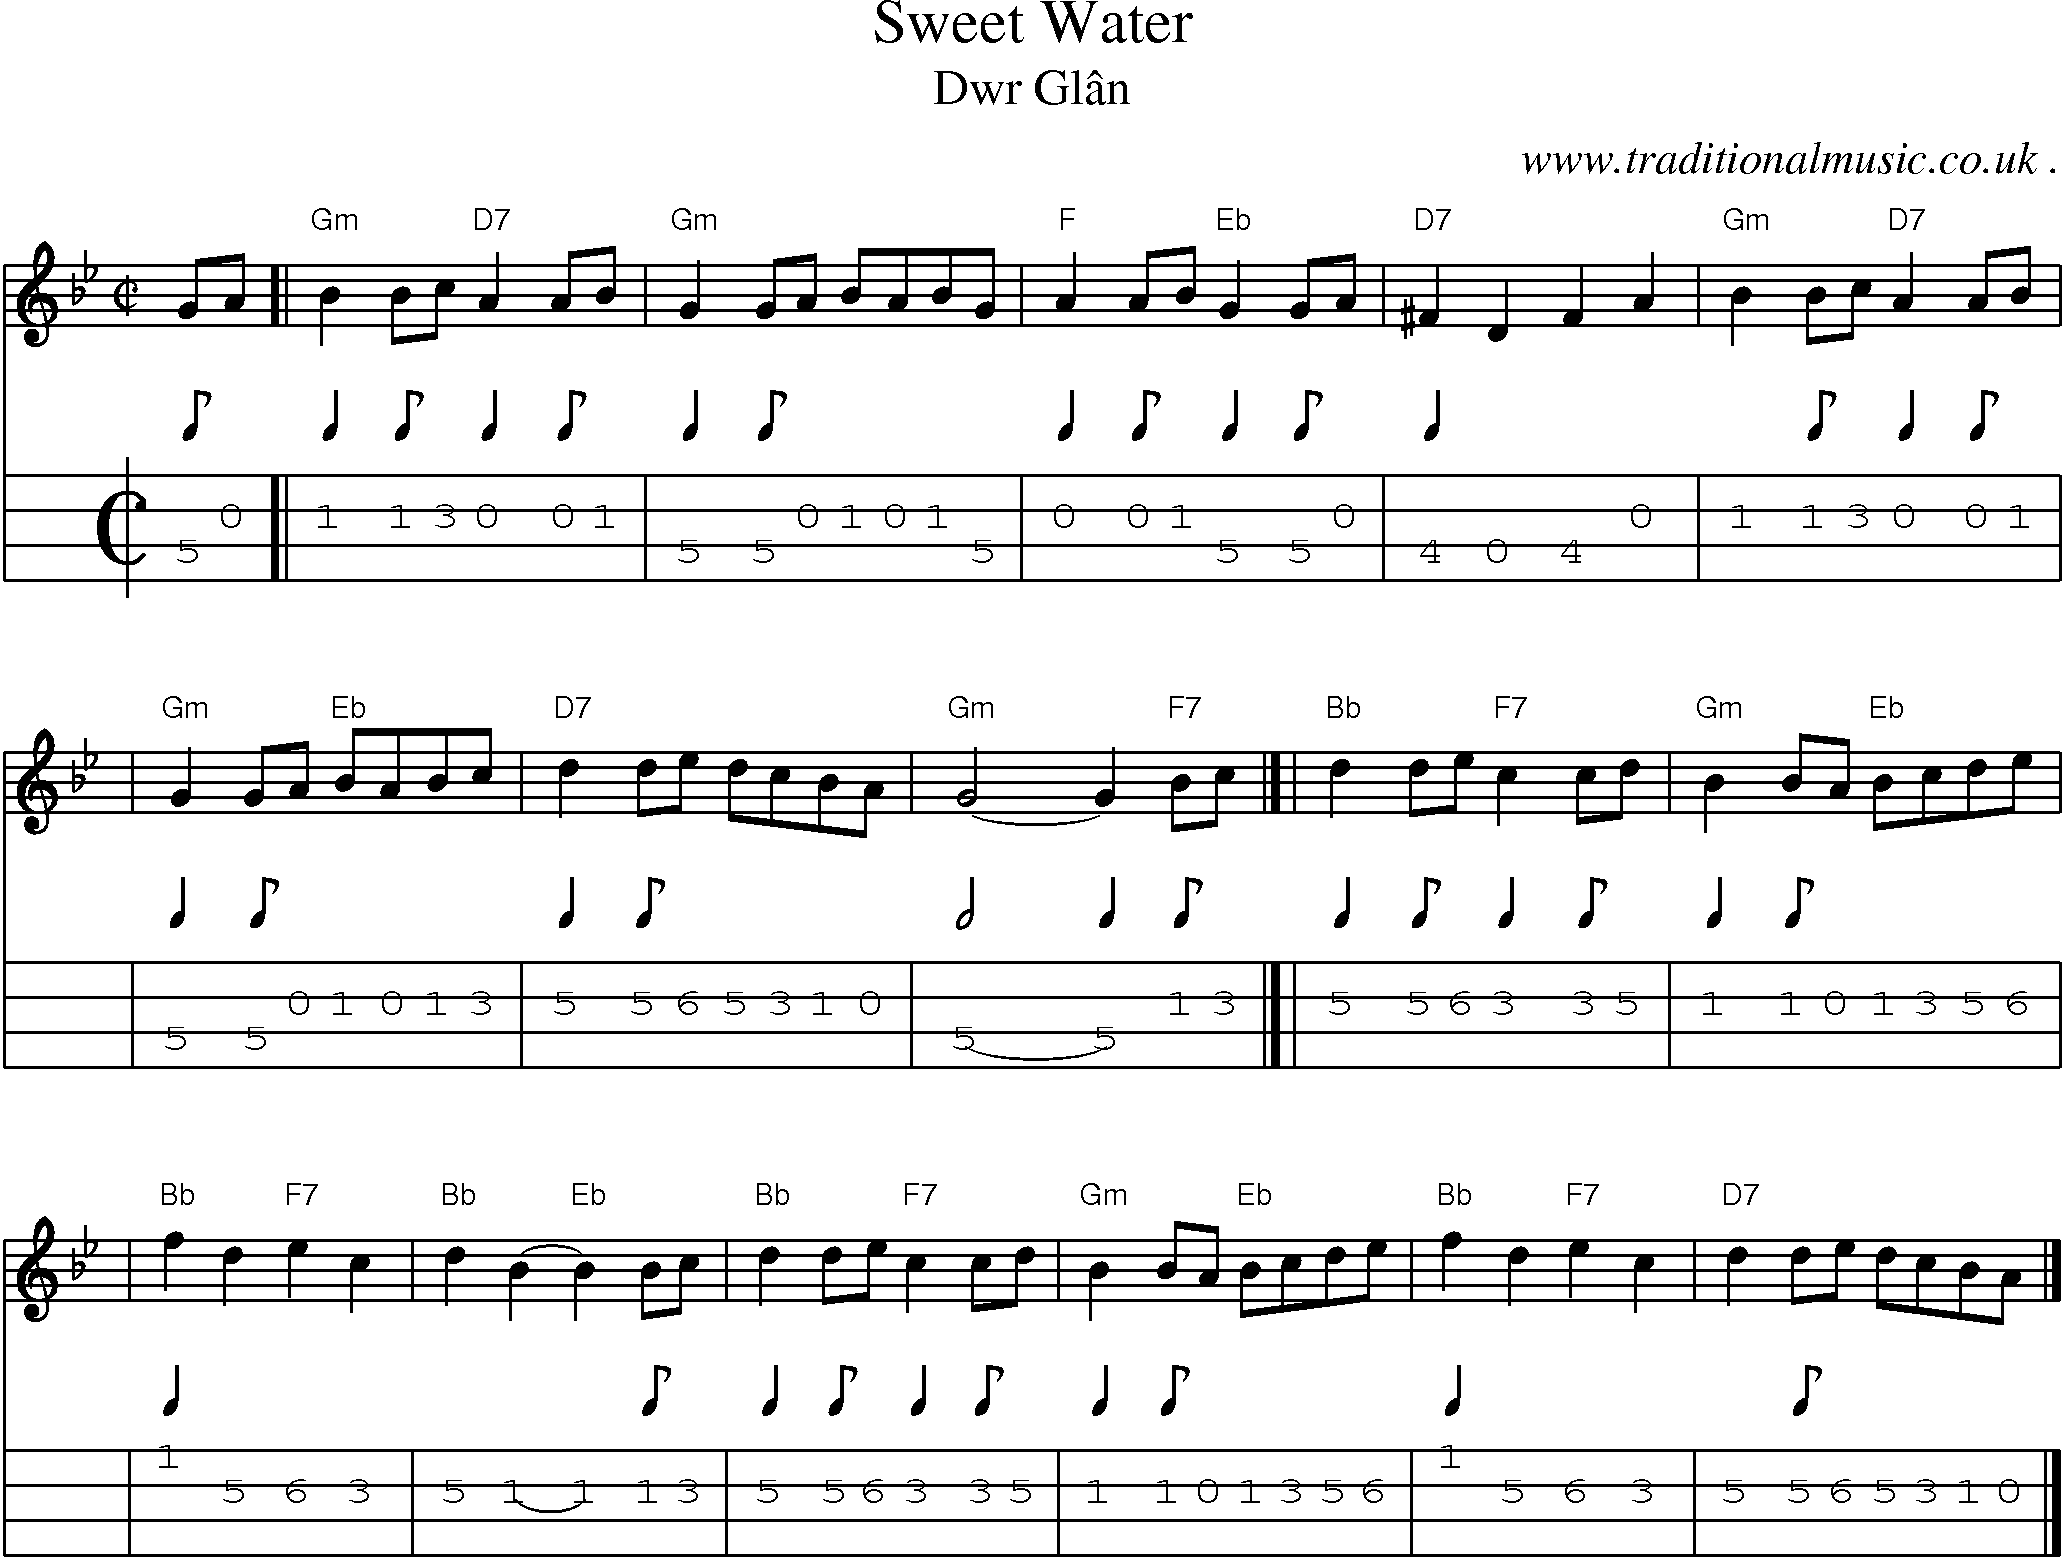 Sheet-music  score, Chords and Mandolin Tabs for Sweet Water